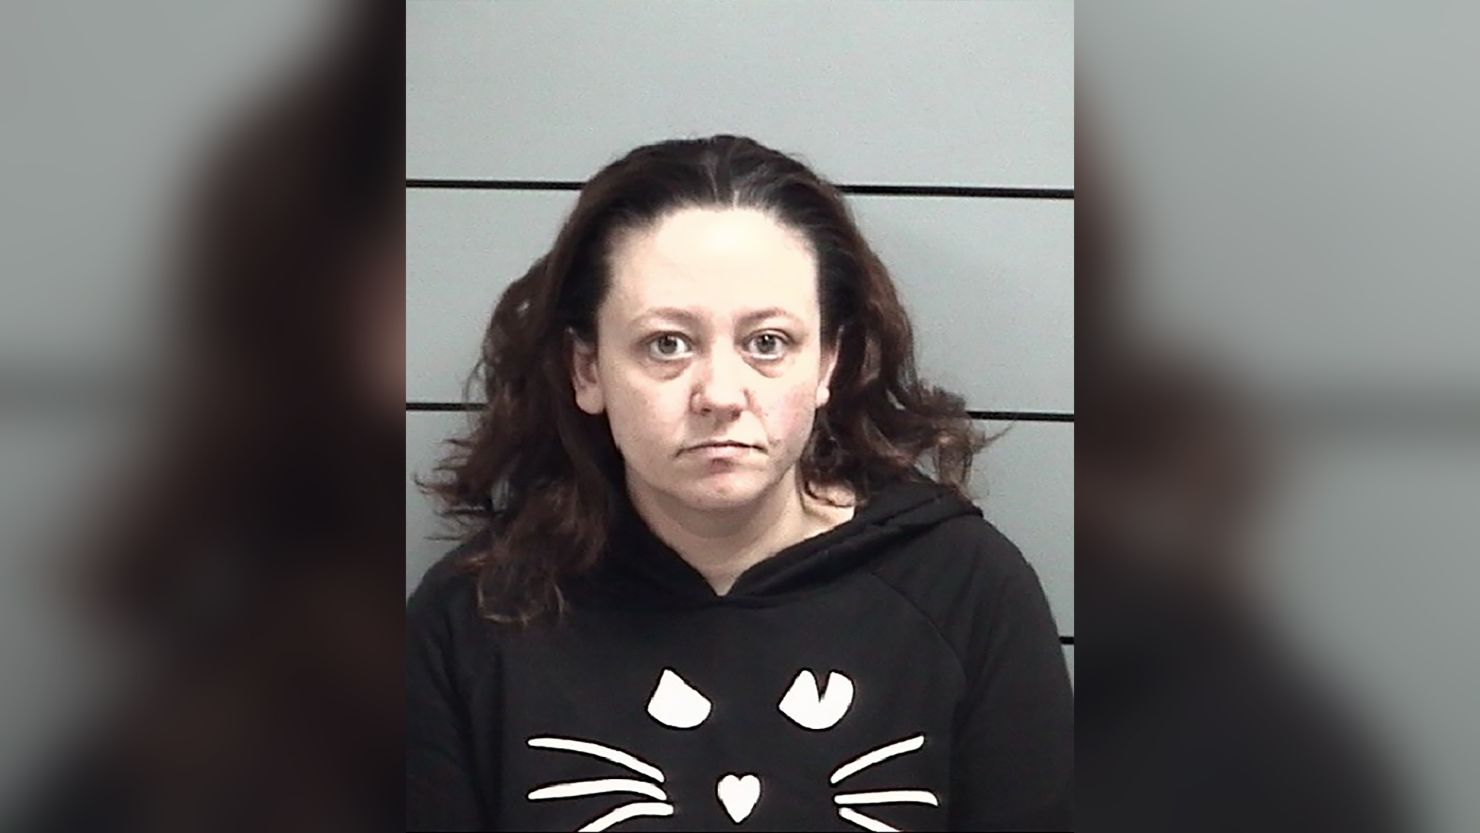 Ashlee Rans was charged after prosecutors say drugs in her breast milk killed an infant.